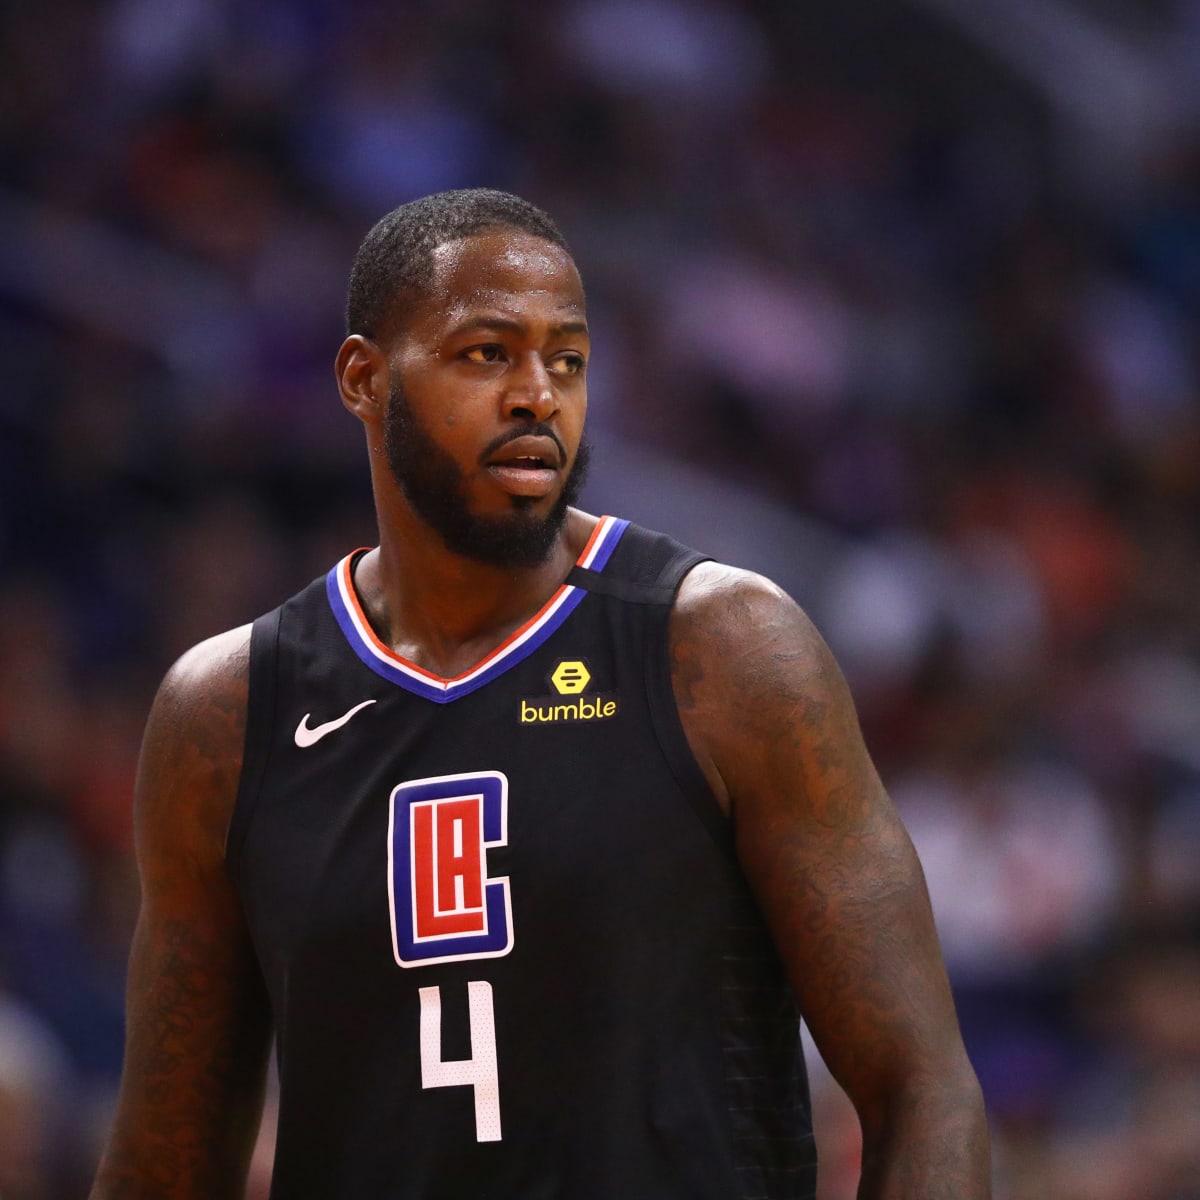 JaMychal Green responds to angry Clippers fan on Instagram